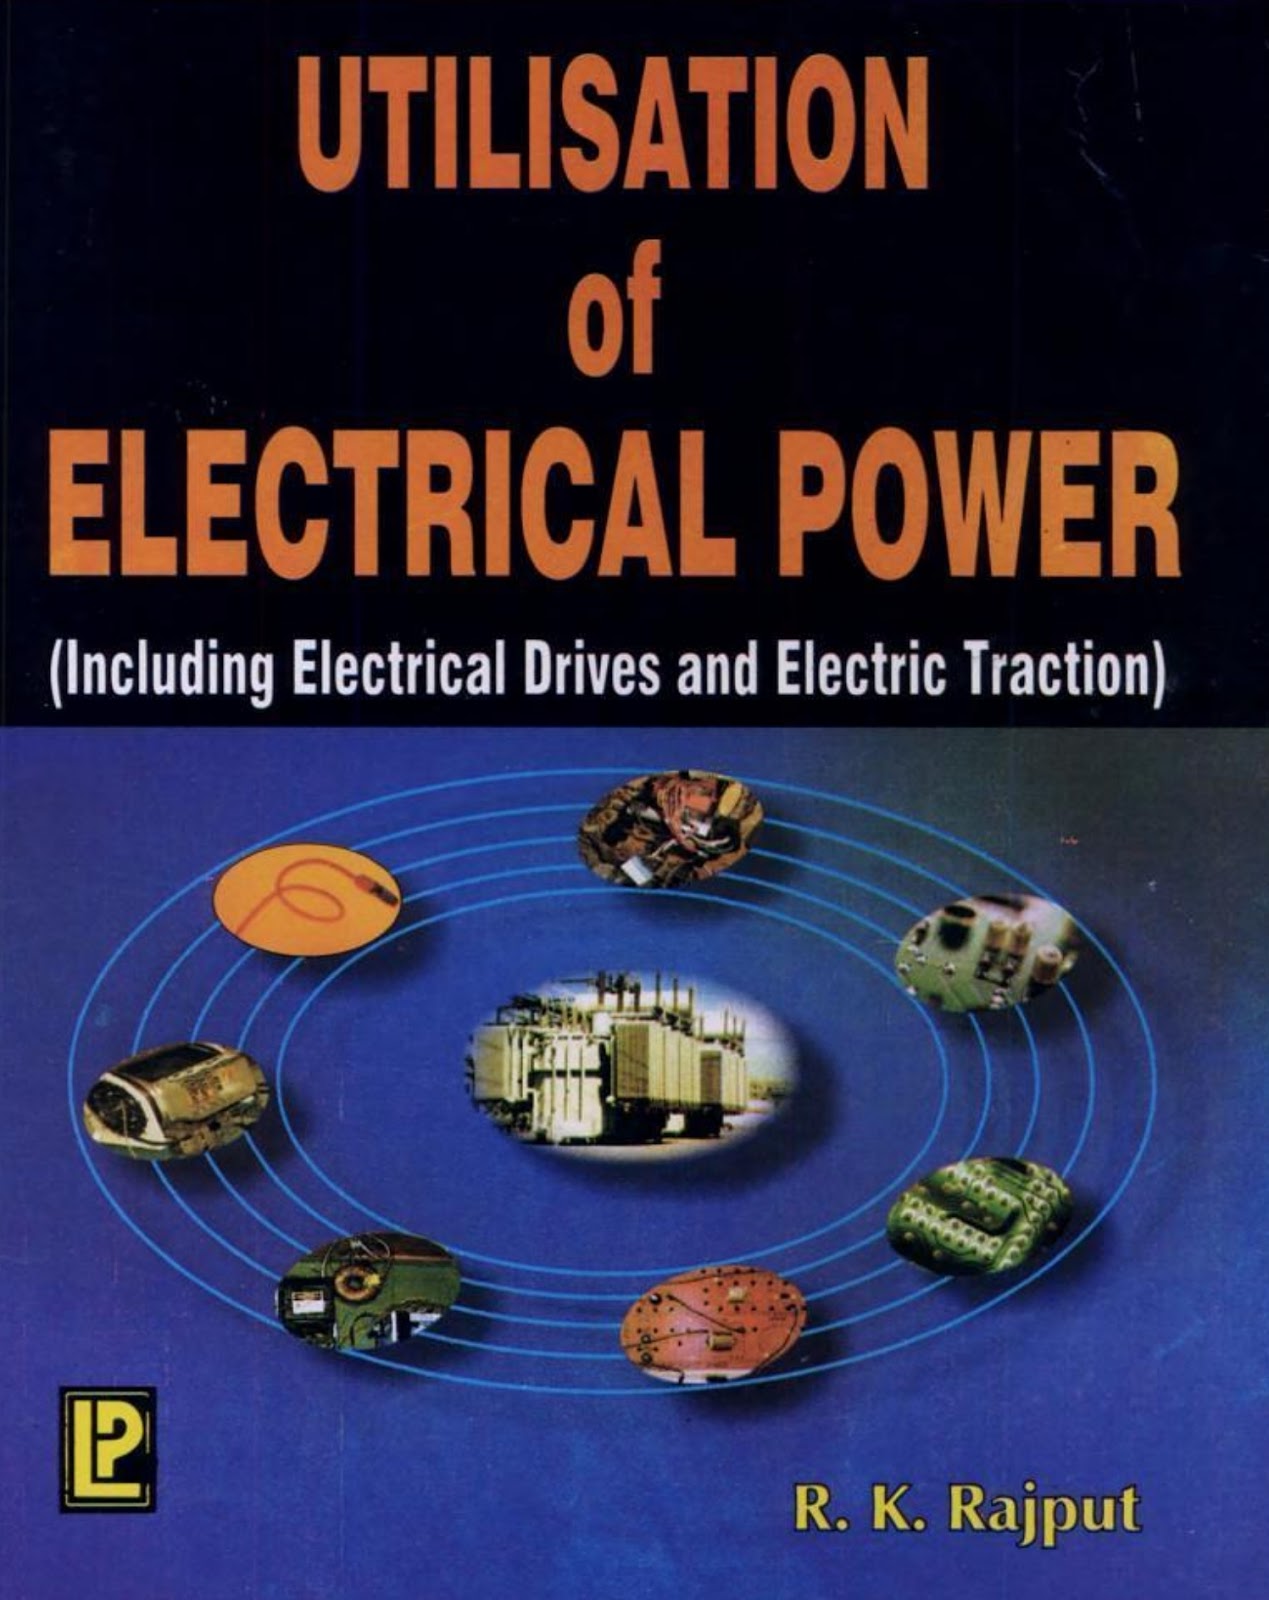 Download Electrical Engineering Books Pdf